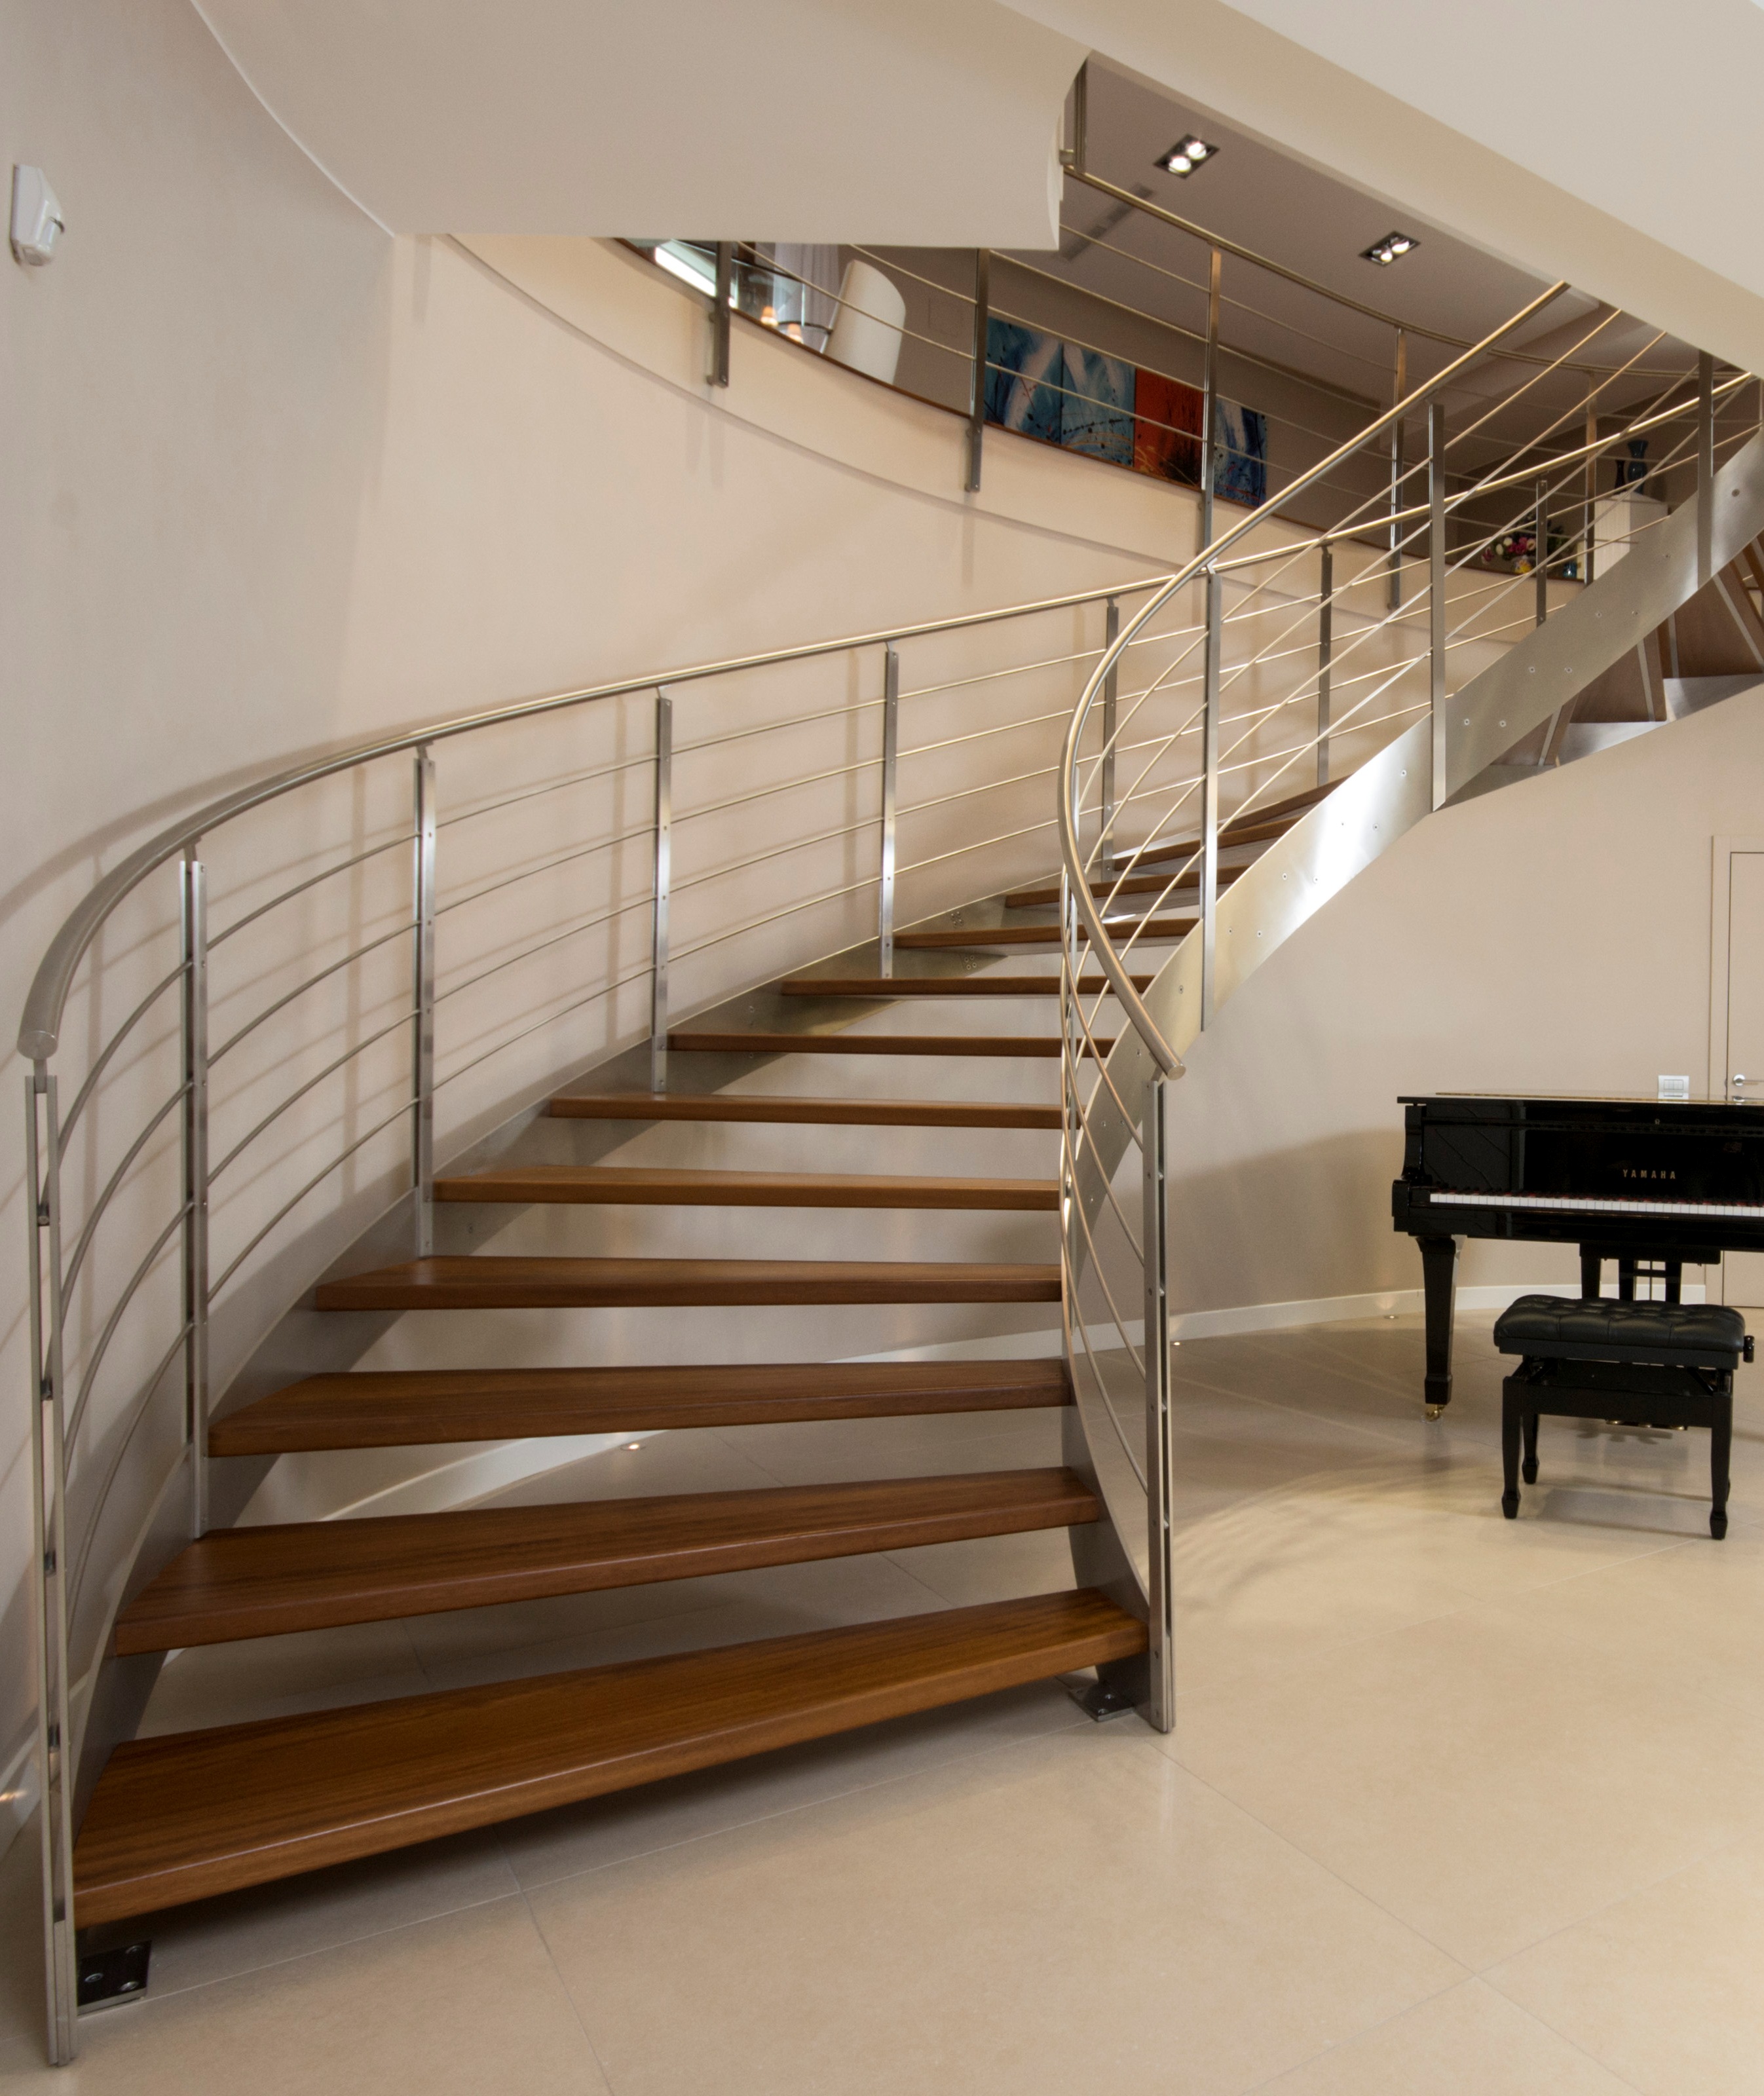 Self-supporting metal staircase - STM 01